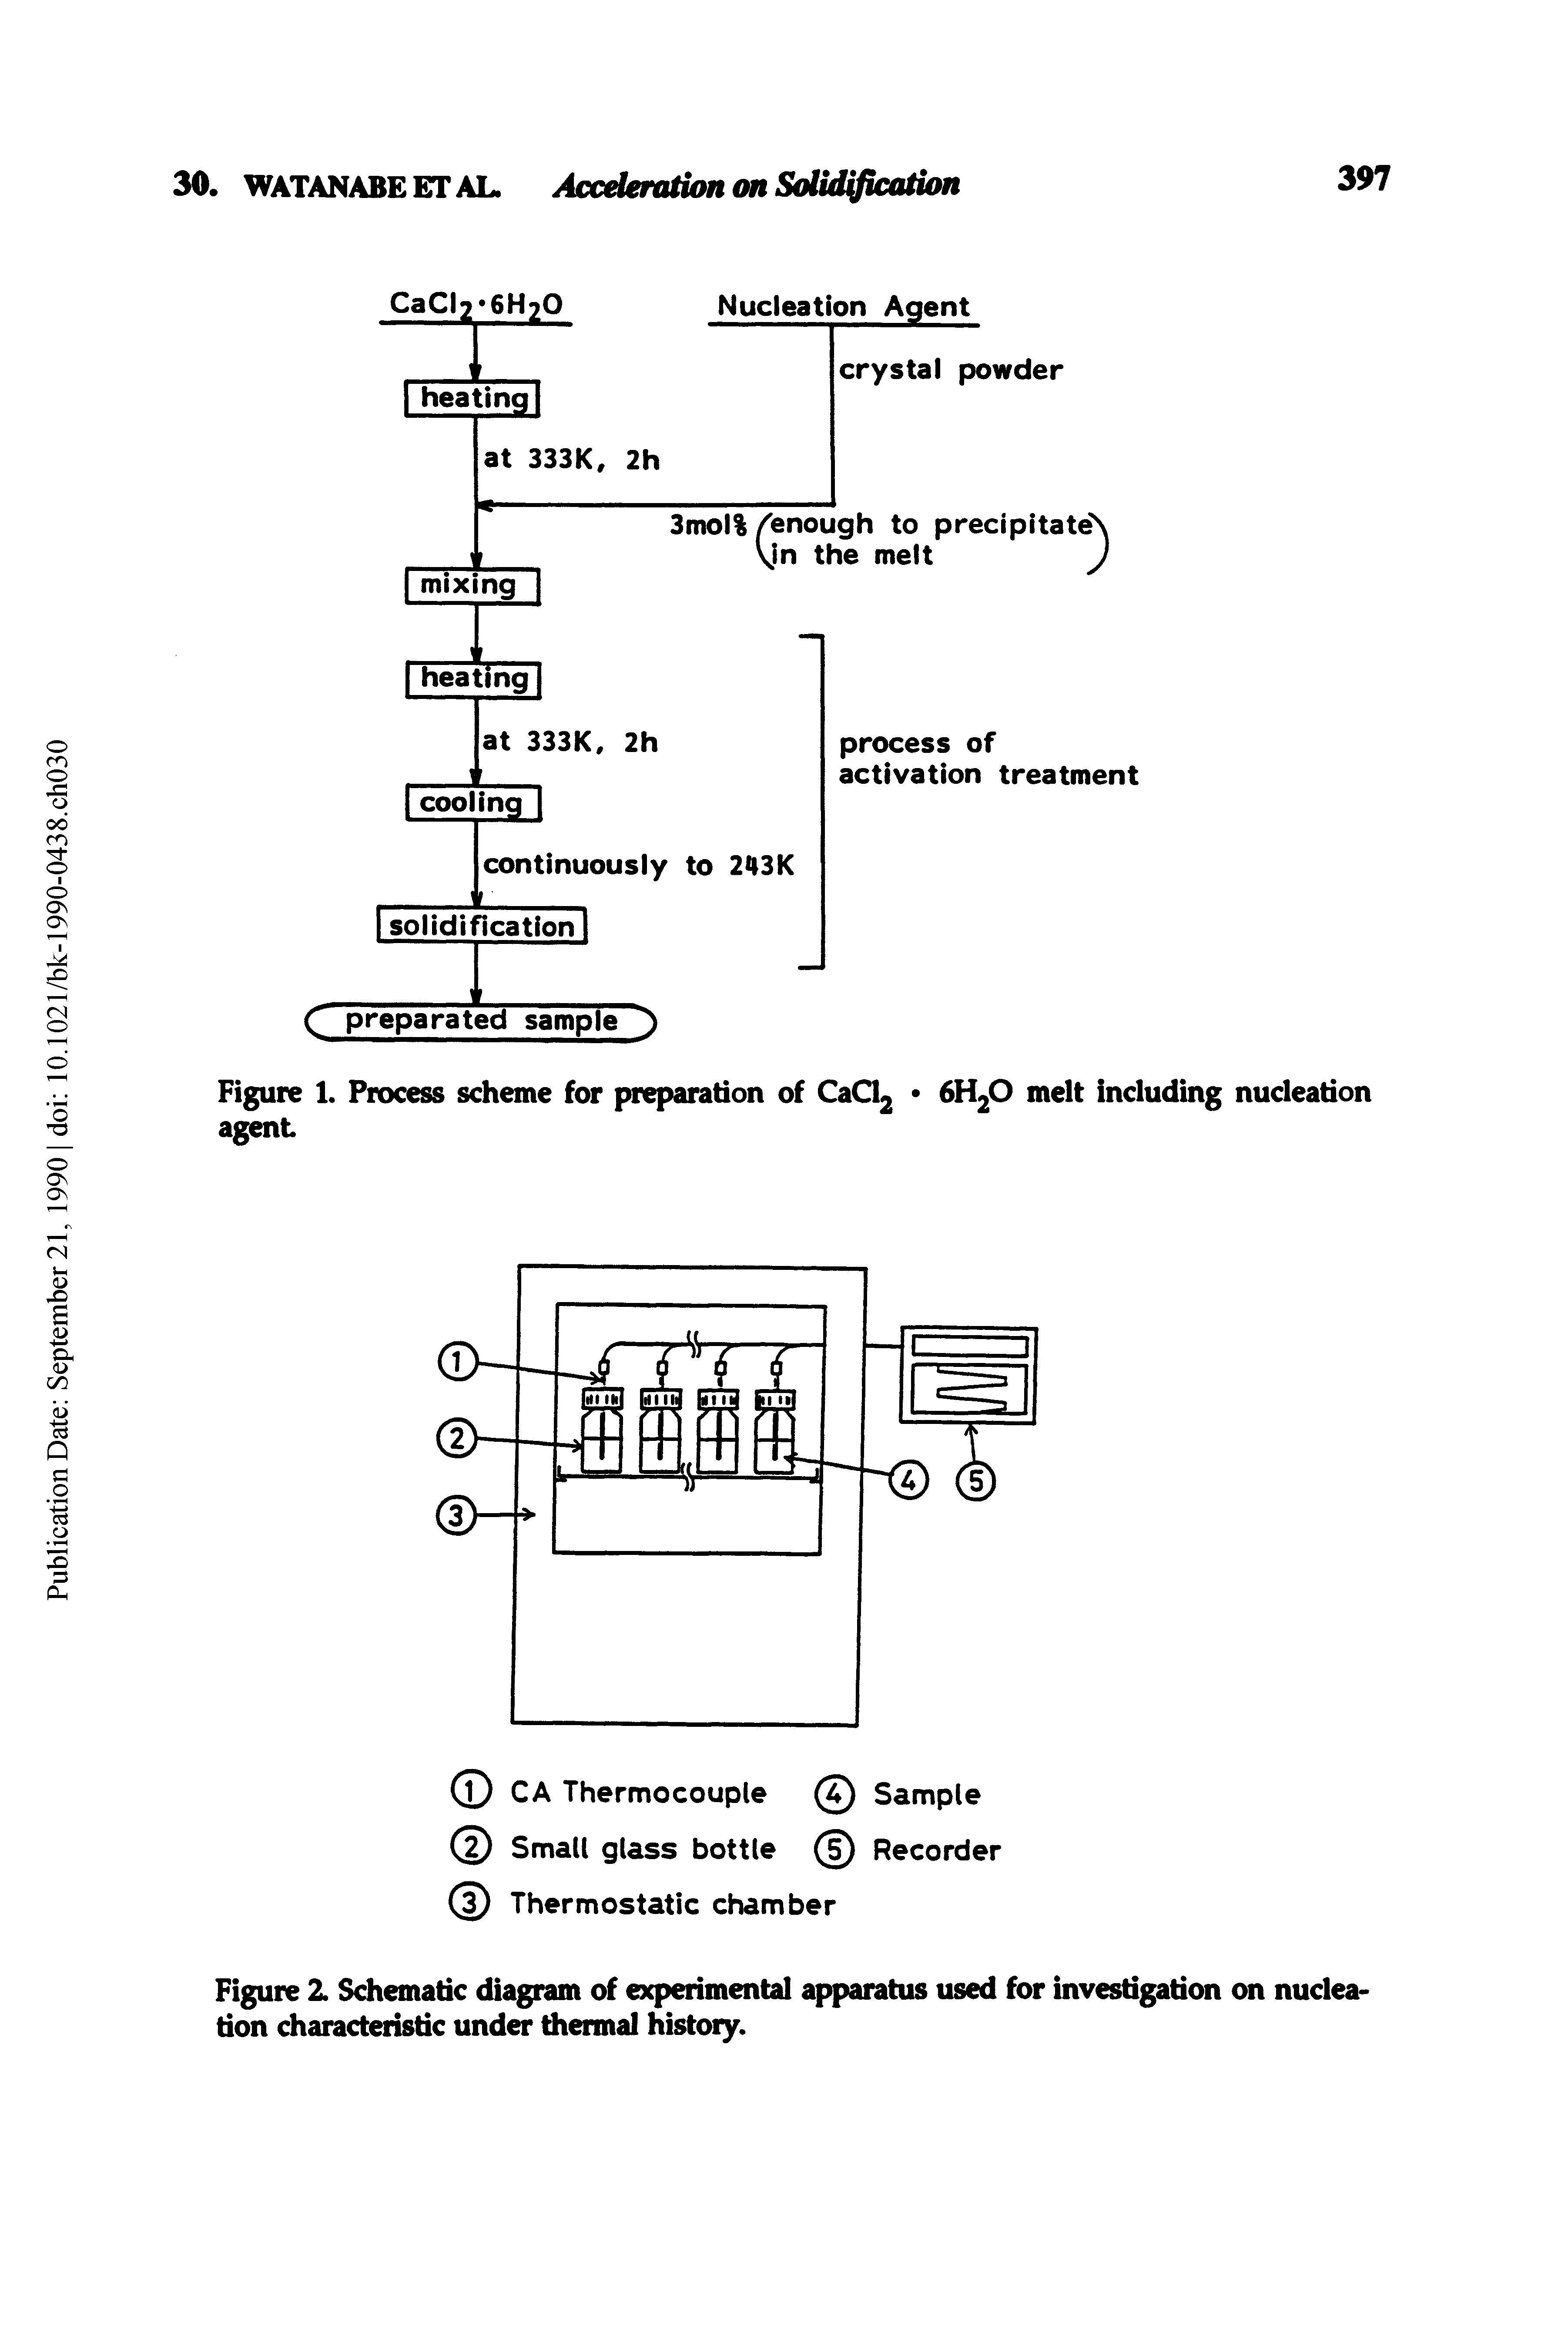 Figure 2. Schematic diagram of experimental apparatus used for investigation on nucleation characteristic under thermal histoiy.